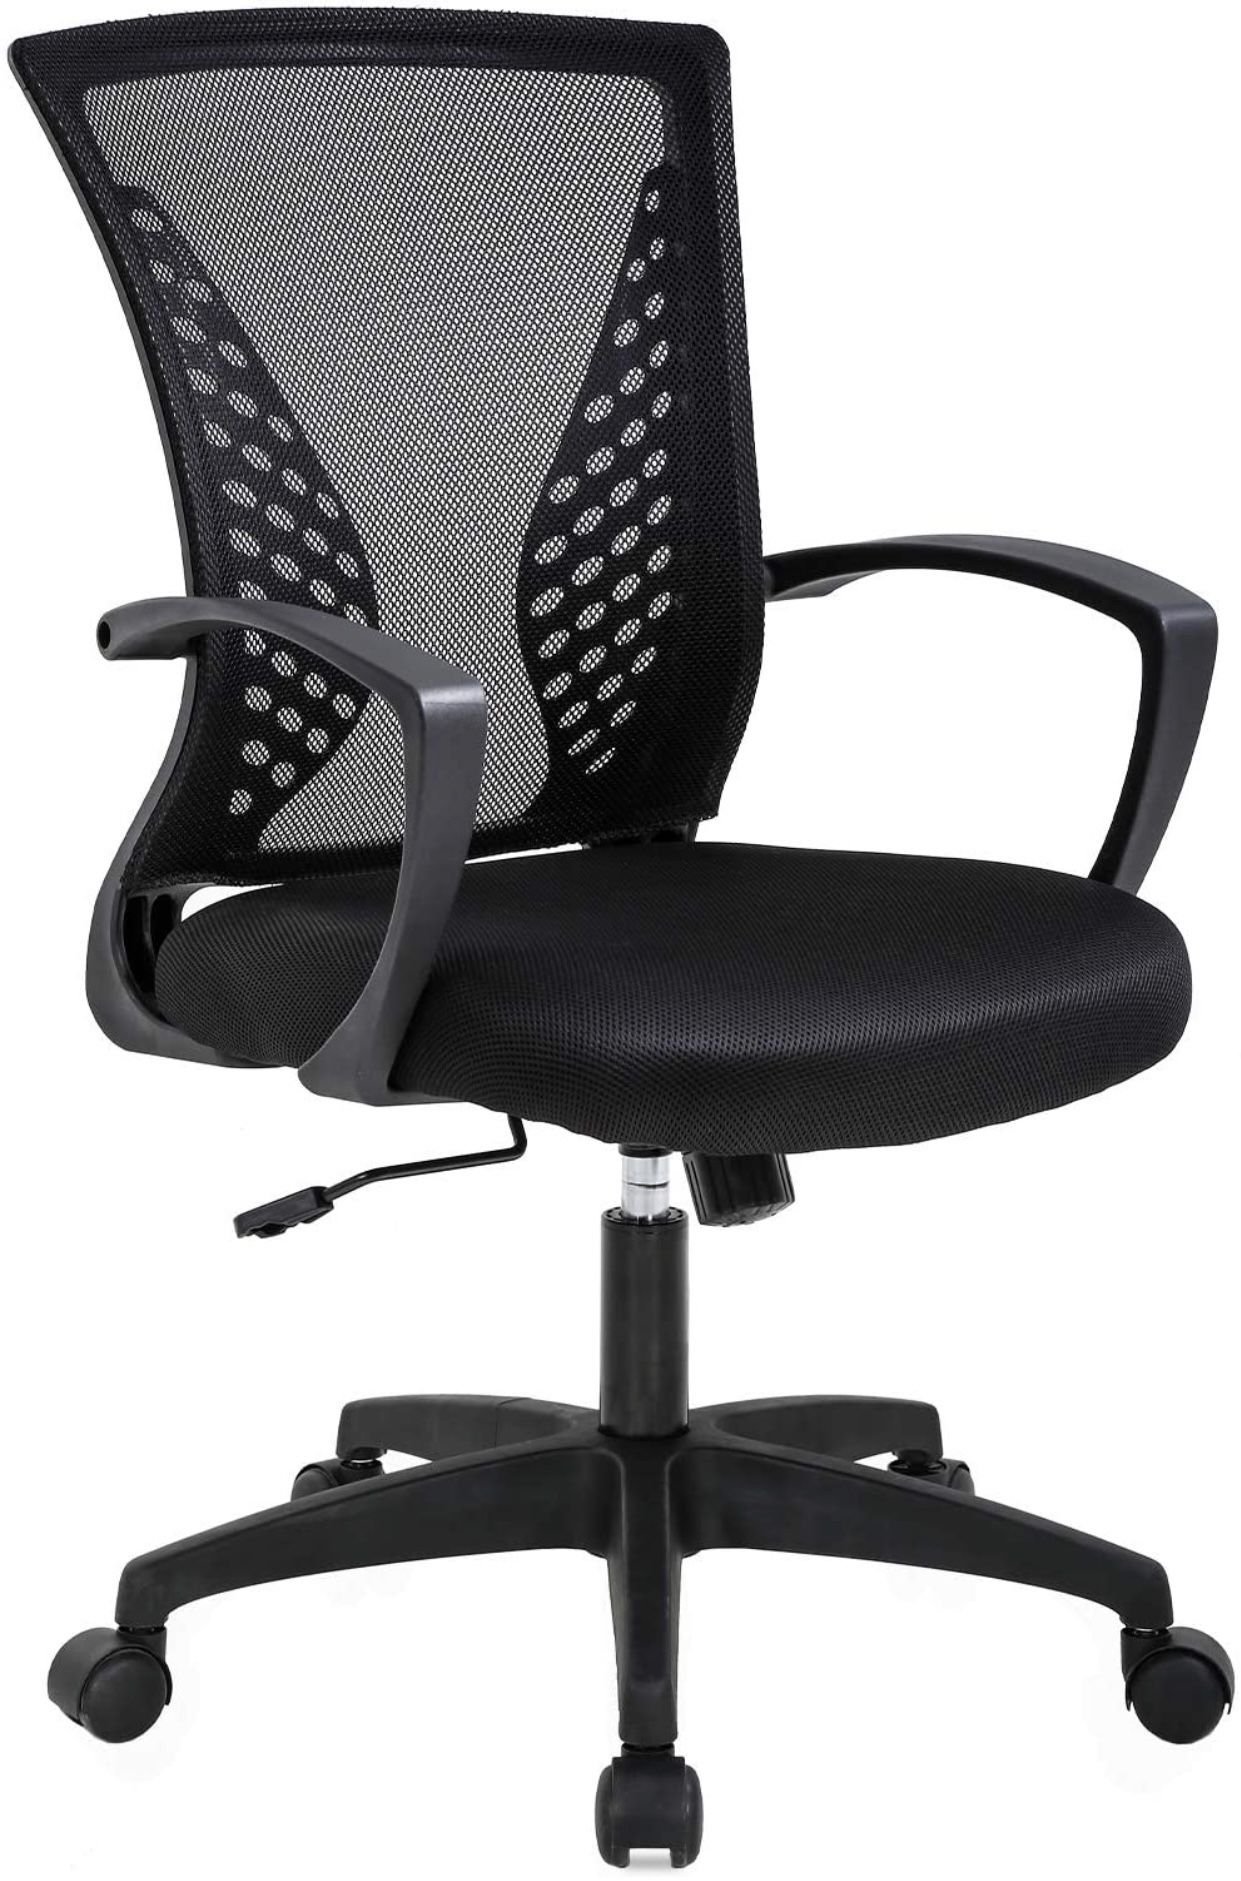 Office Chair Ergonomic Desk Chair Mesh Computer Chair with Lumbar Support Armrest Mid Back Rolling Swivel Adjustable Task Chair 